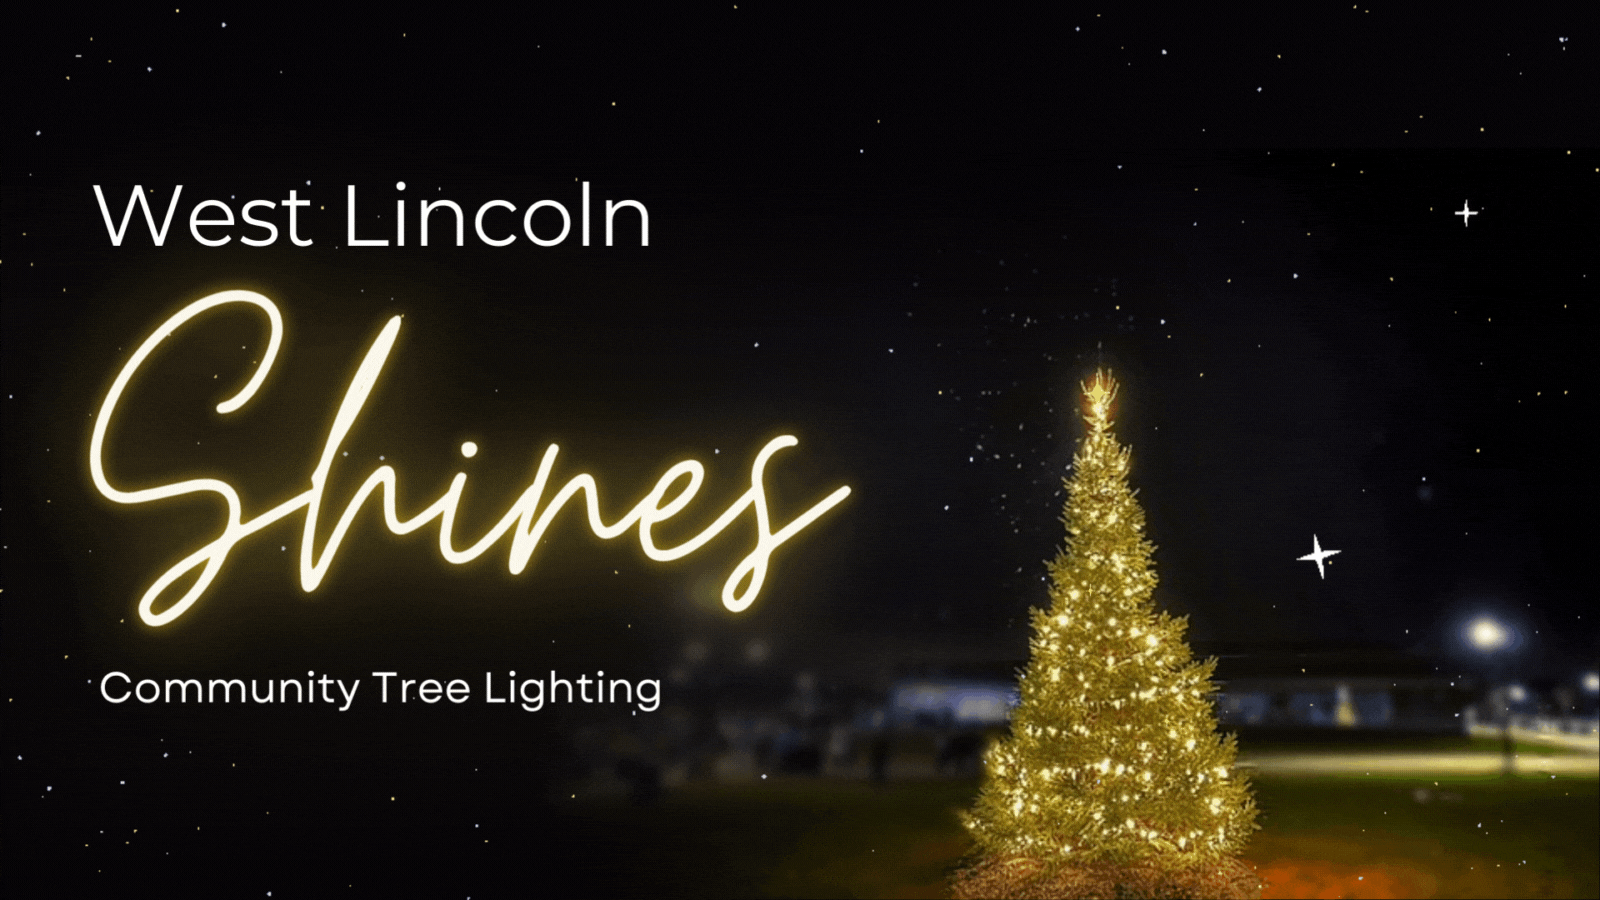 Photo of Christmas tree outside West Lincoln Community Centre lit with twinkling lights with text that says West Lincoln Shines Community Tree Lighting